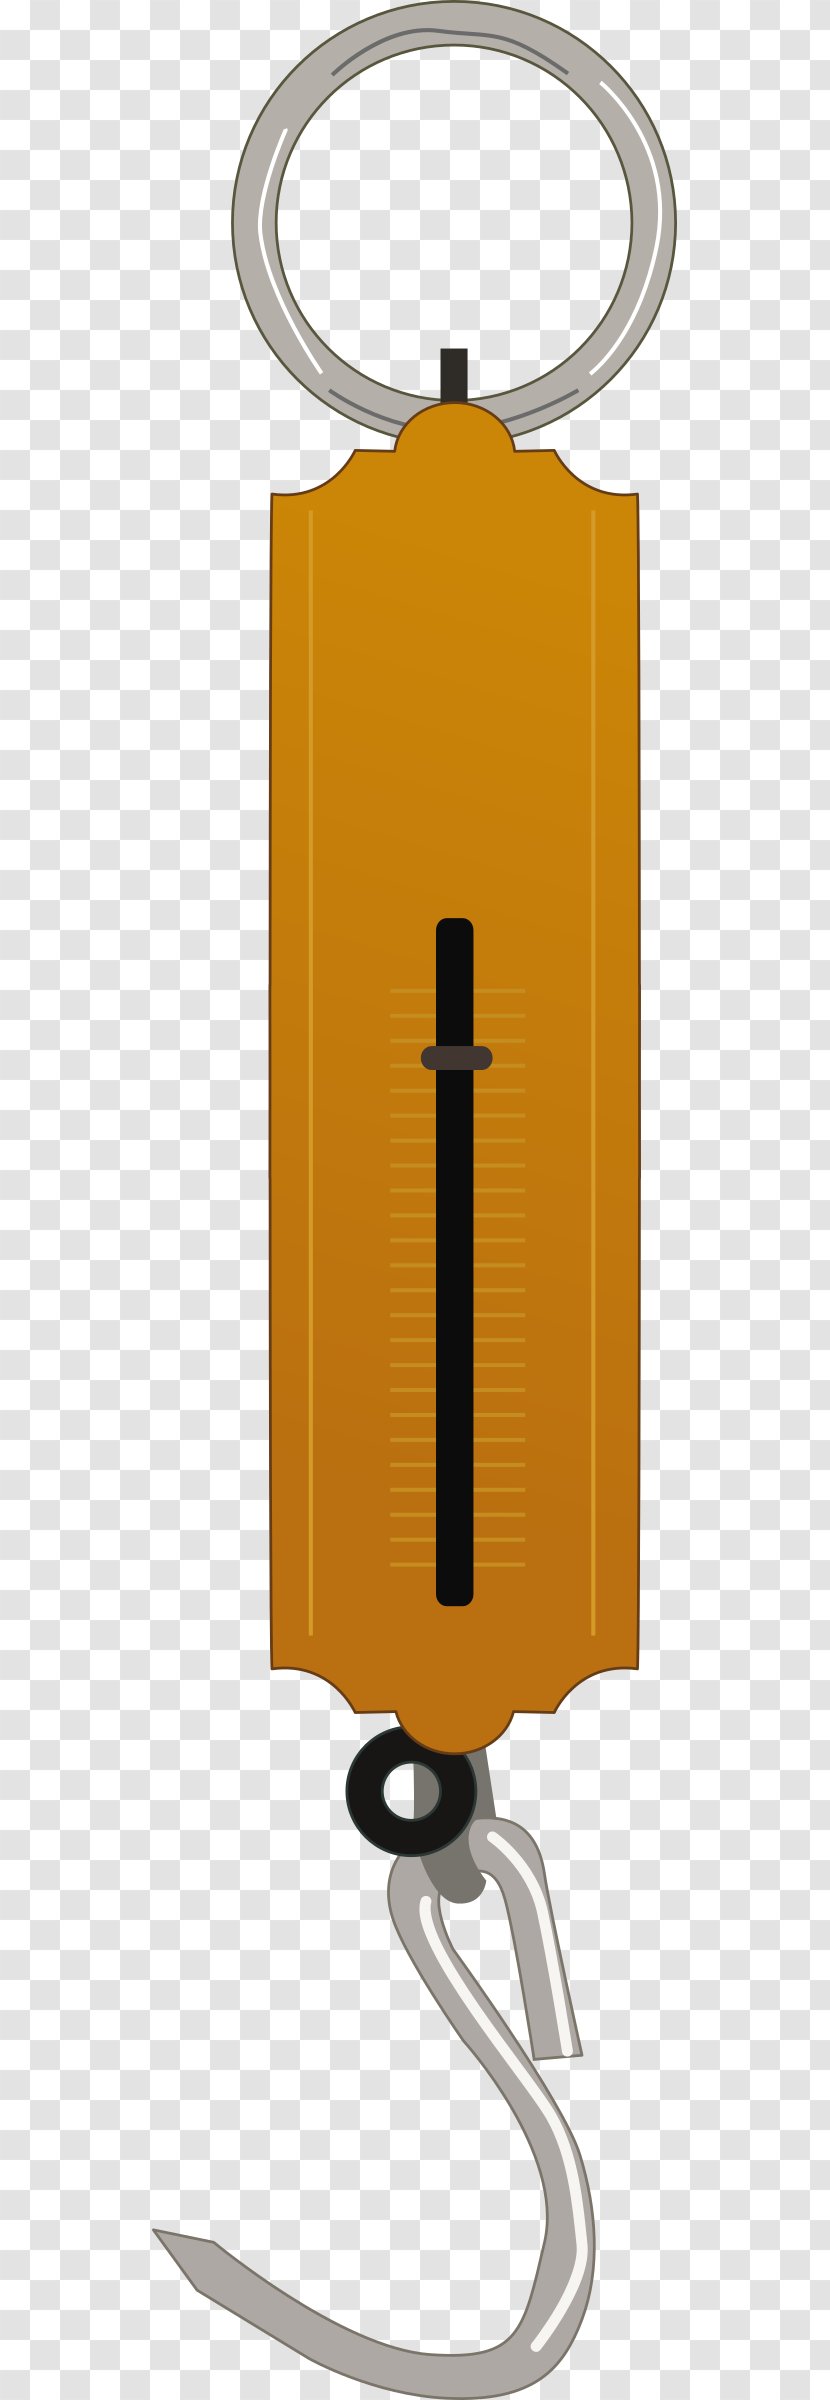 Measuring Scales Weight - Image File Formats - Tool Design Transparent PNG